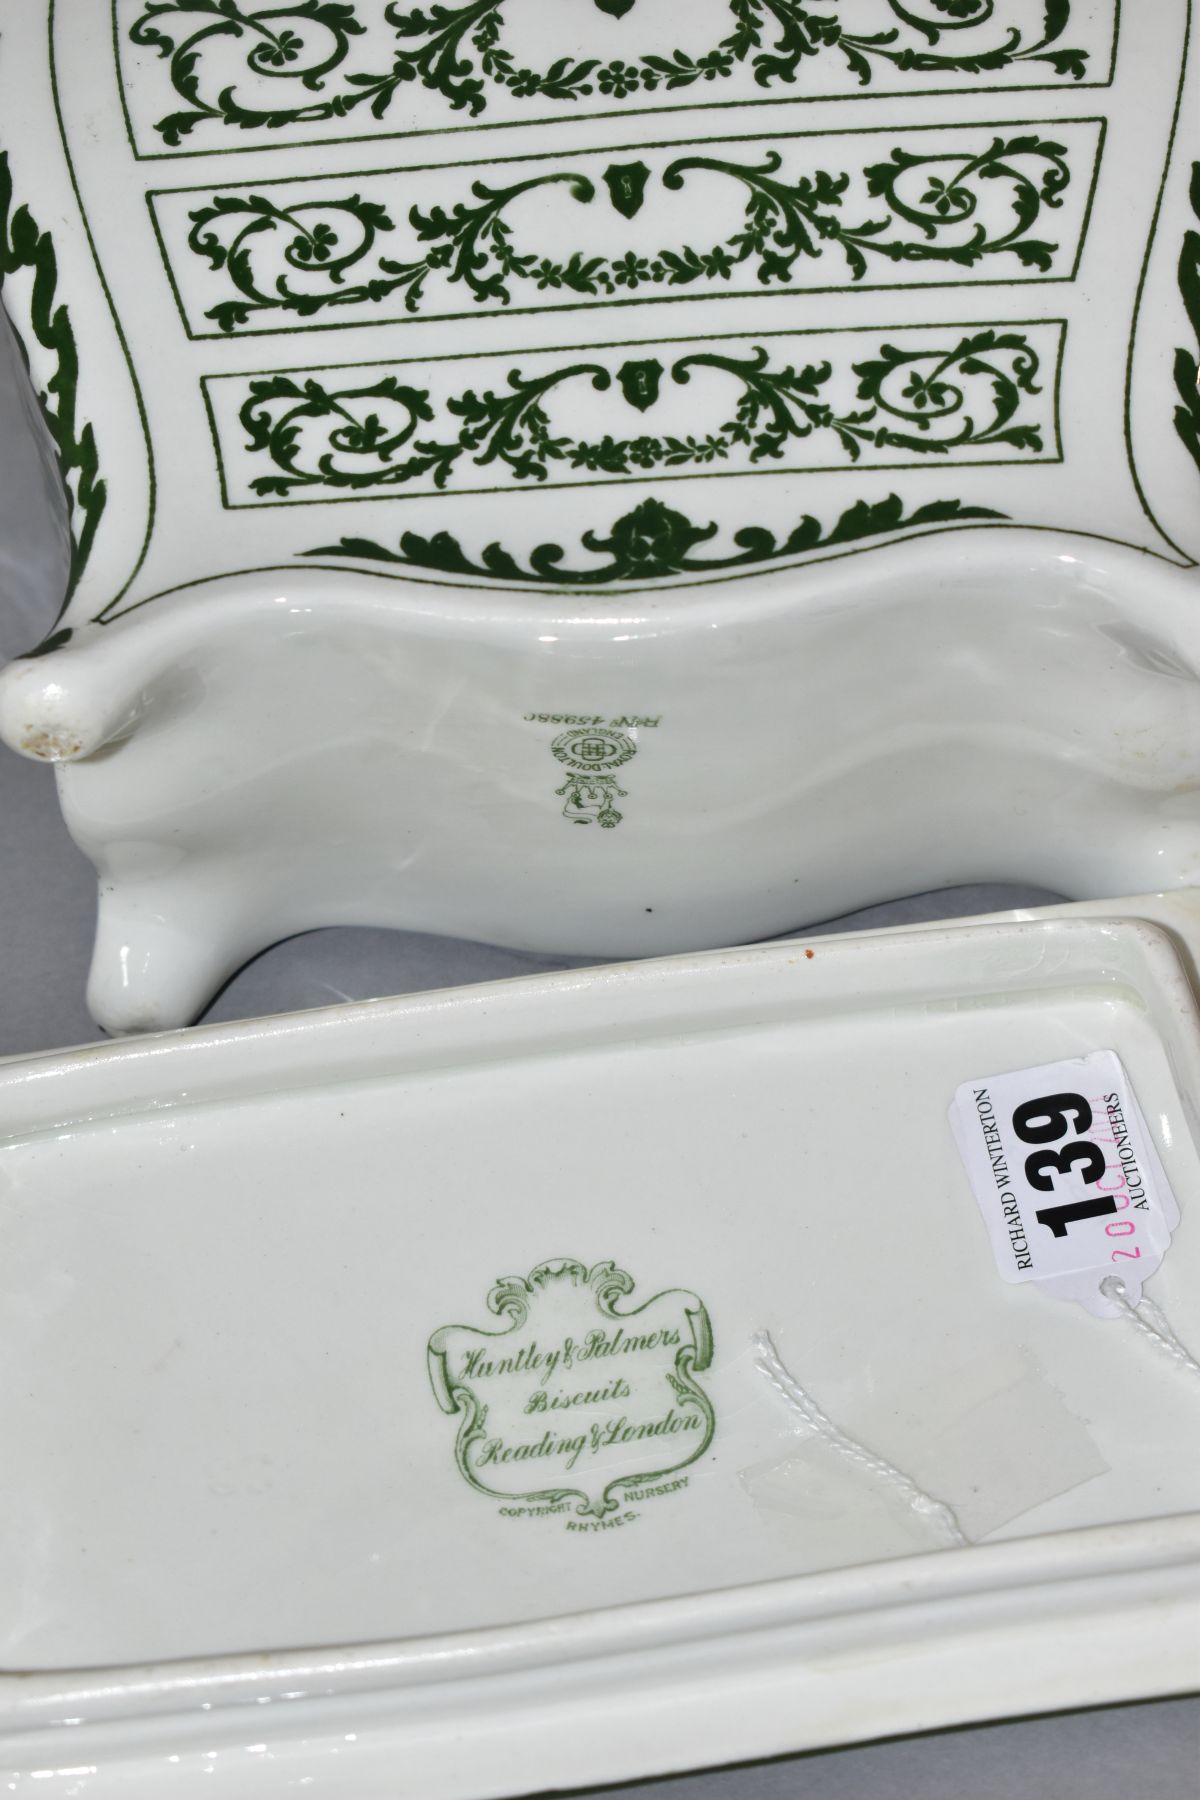 A ROYAL DOULTON NURSERY RHYMES 'A' SERIES WARE HUNTLEY & PALMERS BISCUIT CASKET IN THE FORM OF A - Image 6 of 7